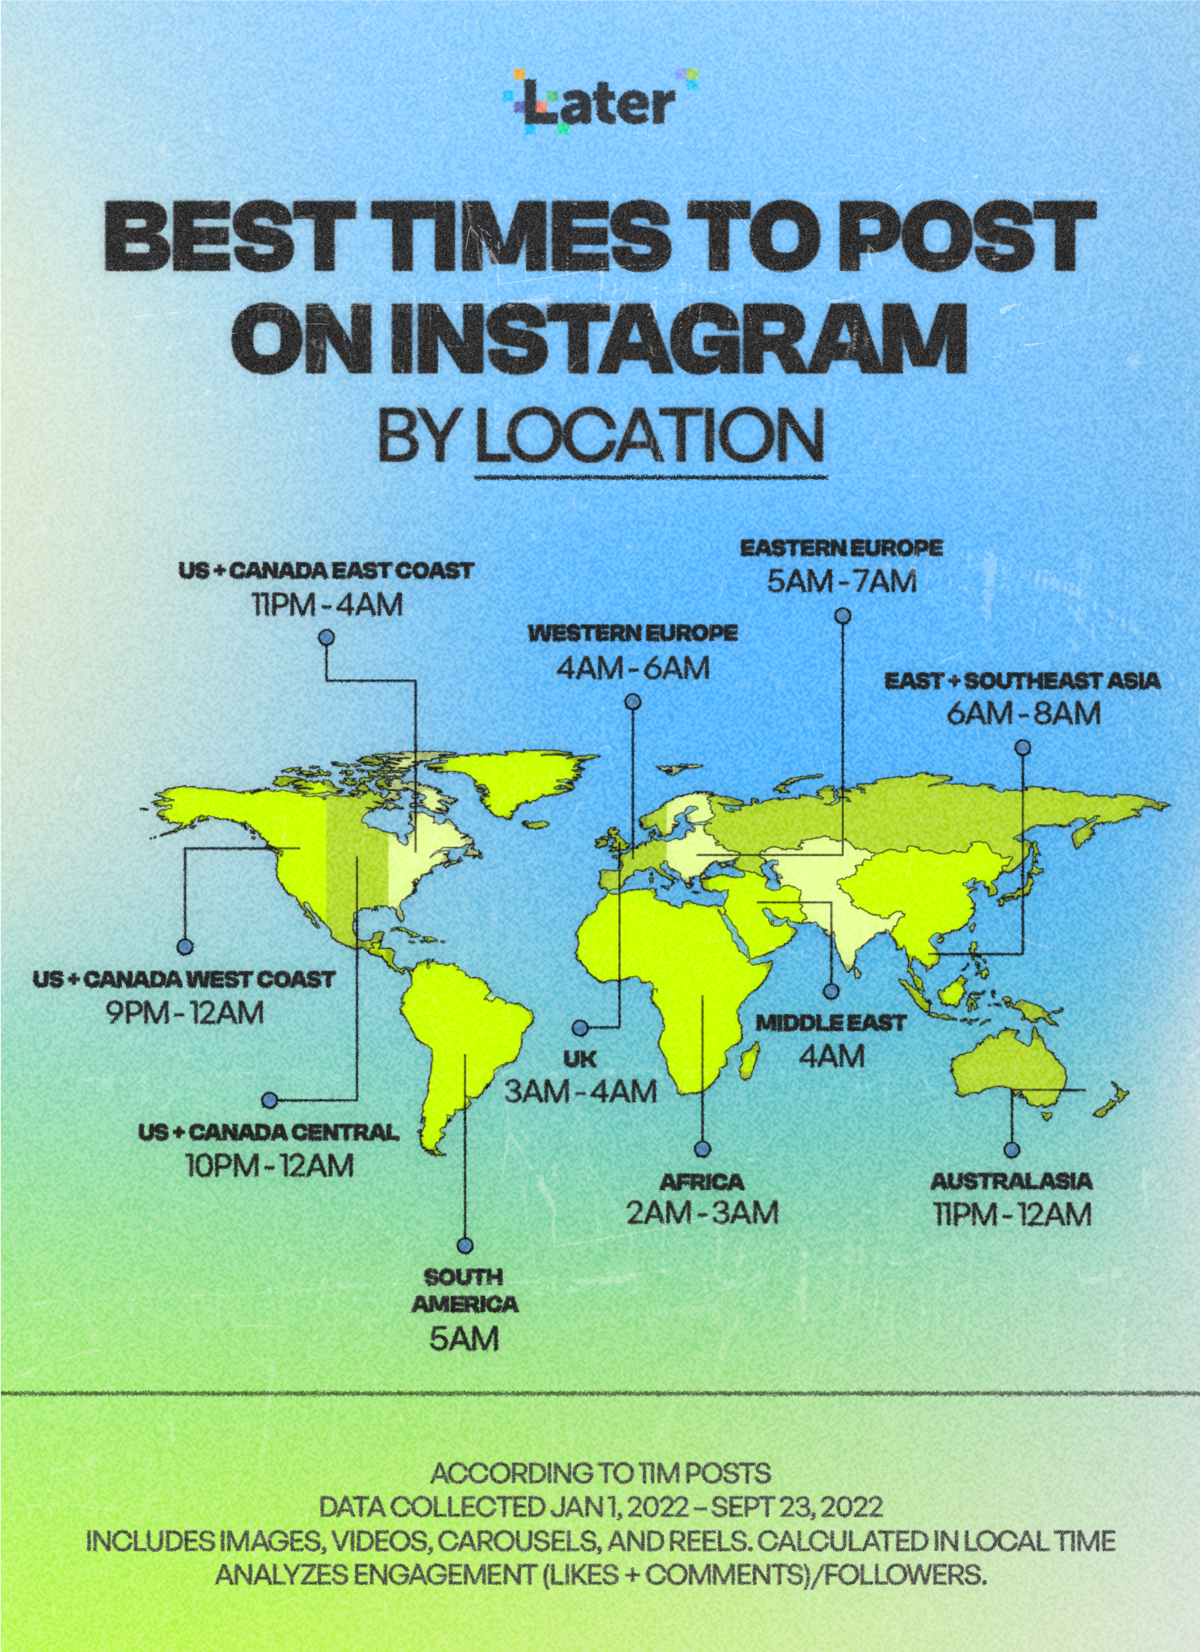 Infographic of world map showing best times to post on Instagram by location